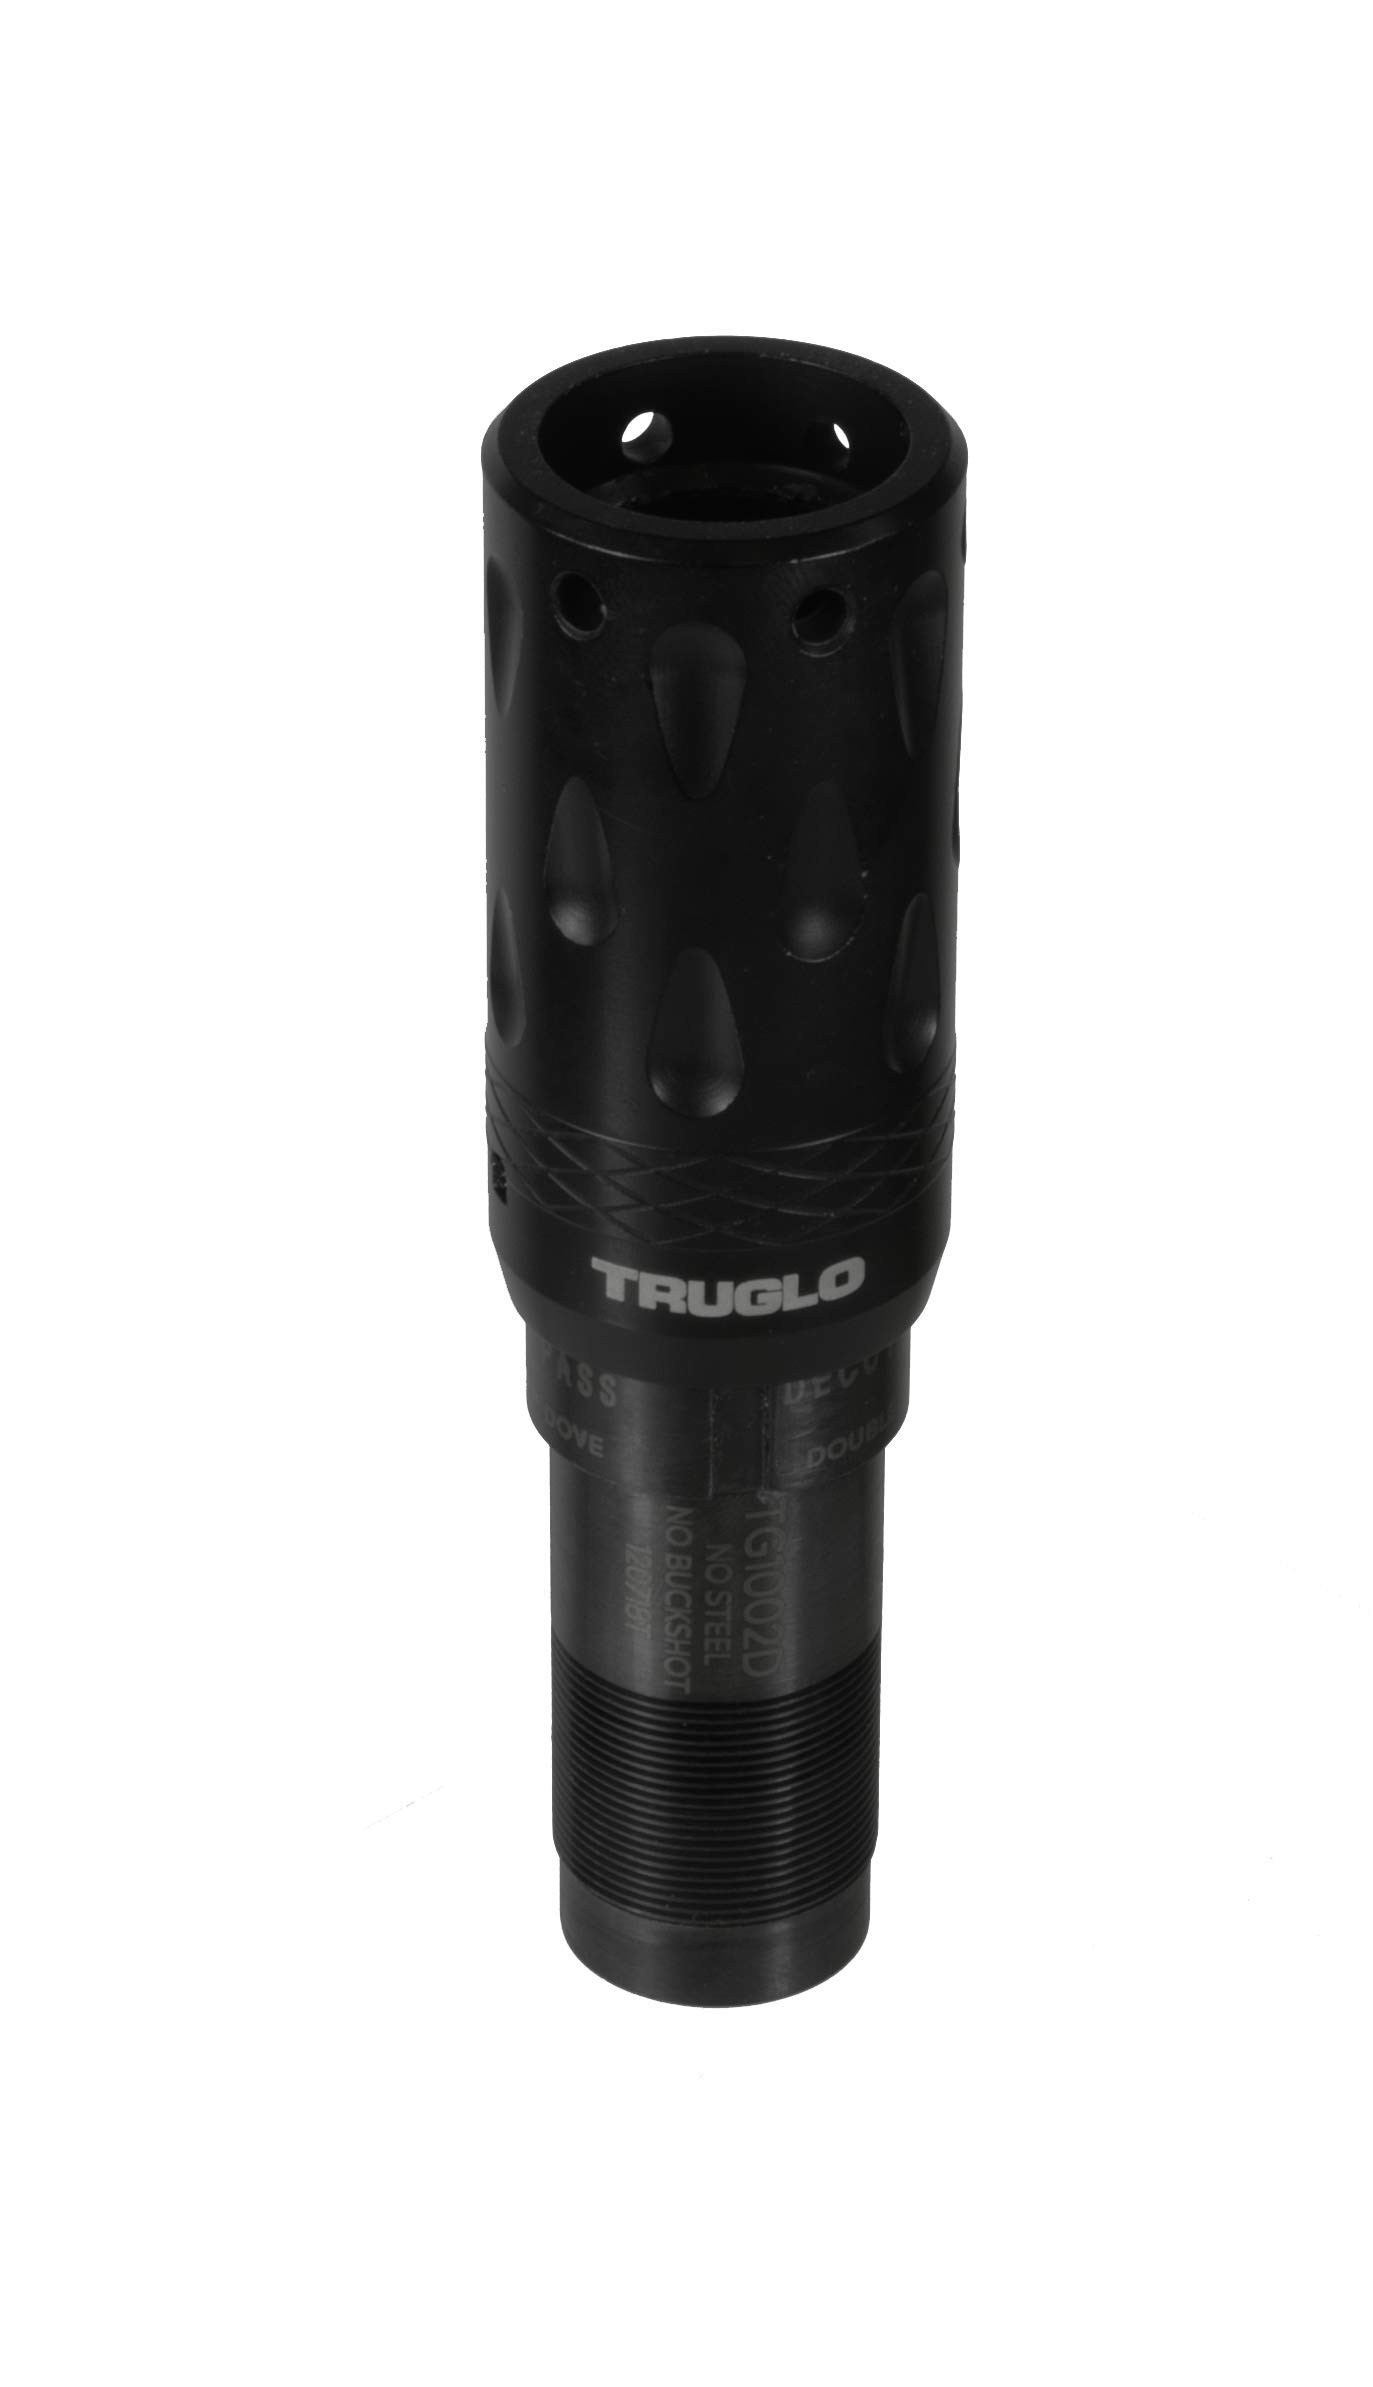 TRUGLO 12 Gа Double-Threat CNC-Machined Dove Choke Tubes | Quickly Adjust for Long-Range Passing Shots or Close-Range Decoy Shots, Winchester